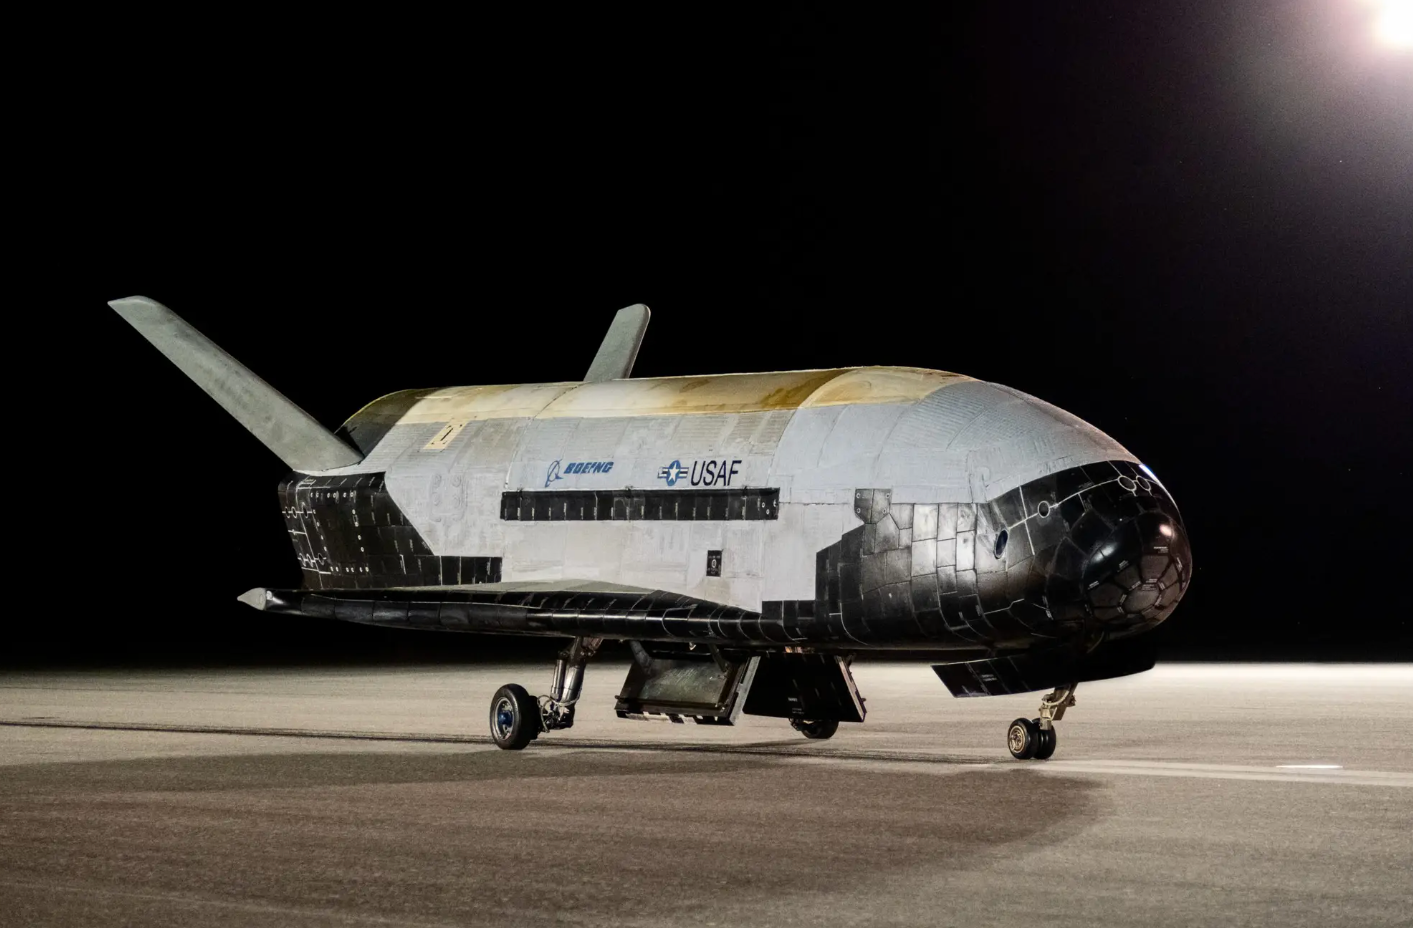 The X-37B Orbital Test Vehicle-6 rests on the flight line at NASA’s Kennedy Space Center, Florida, on November 12, 2022, after it concluded its sixth successful mission that lasted 908 days.&nbsp;<em>U.S. Air Force photo by Staff Sgt. Adam Shank</em>